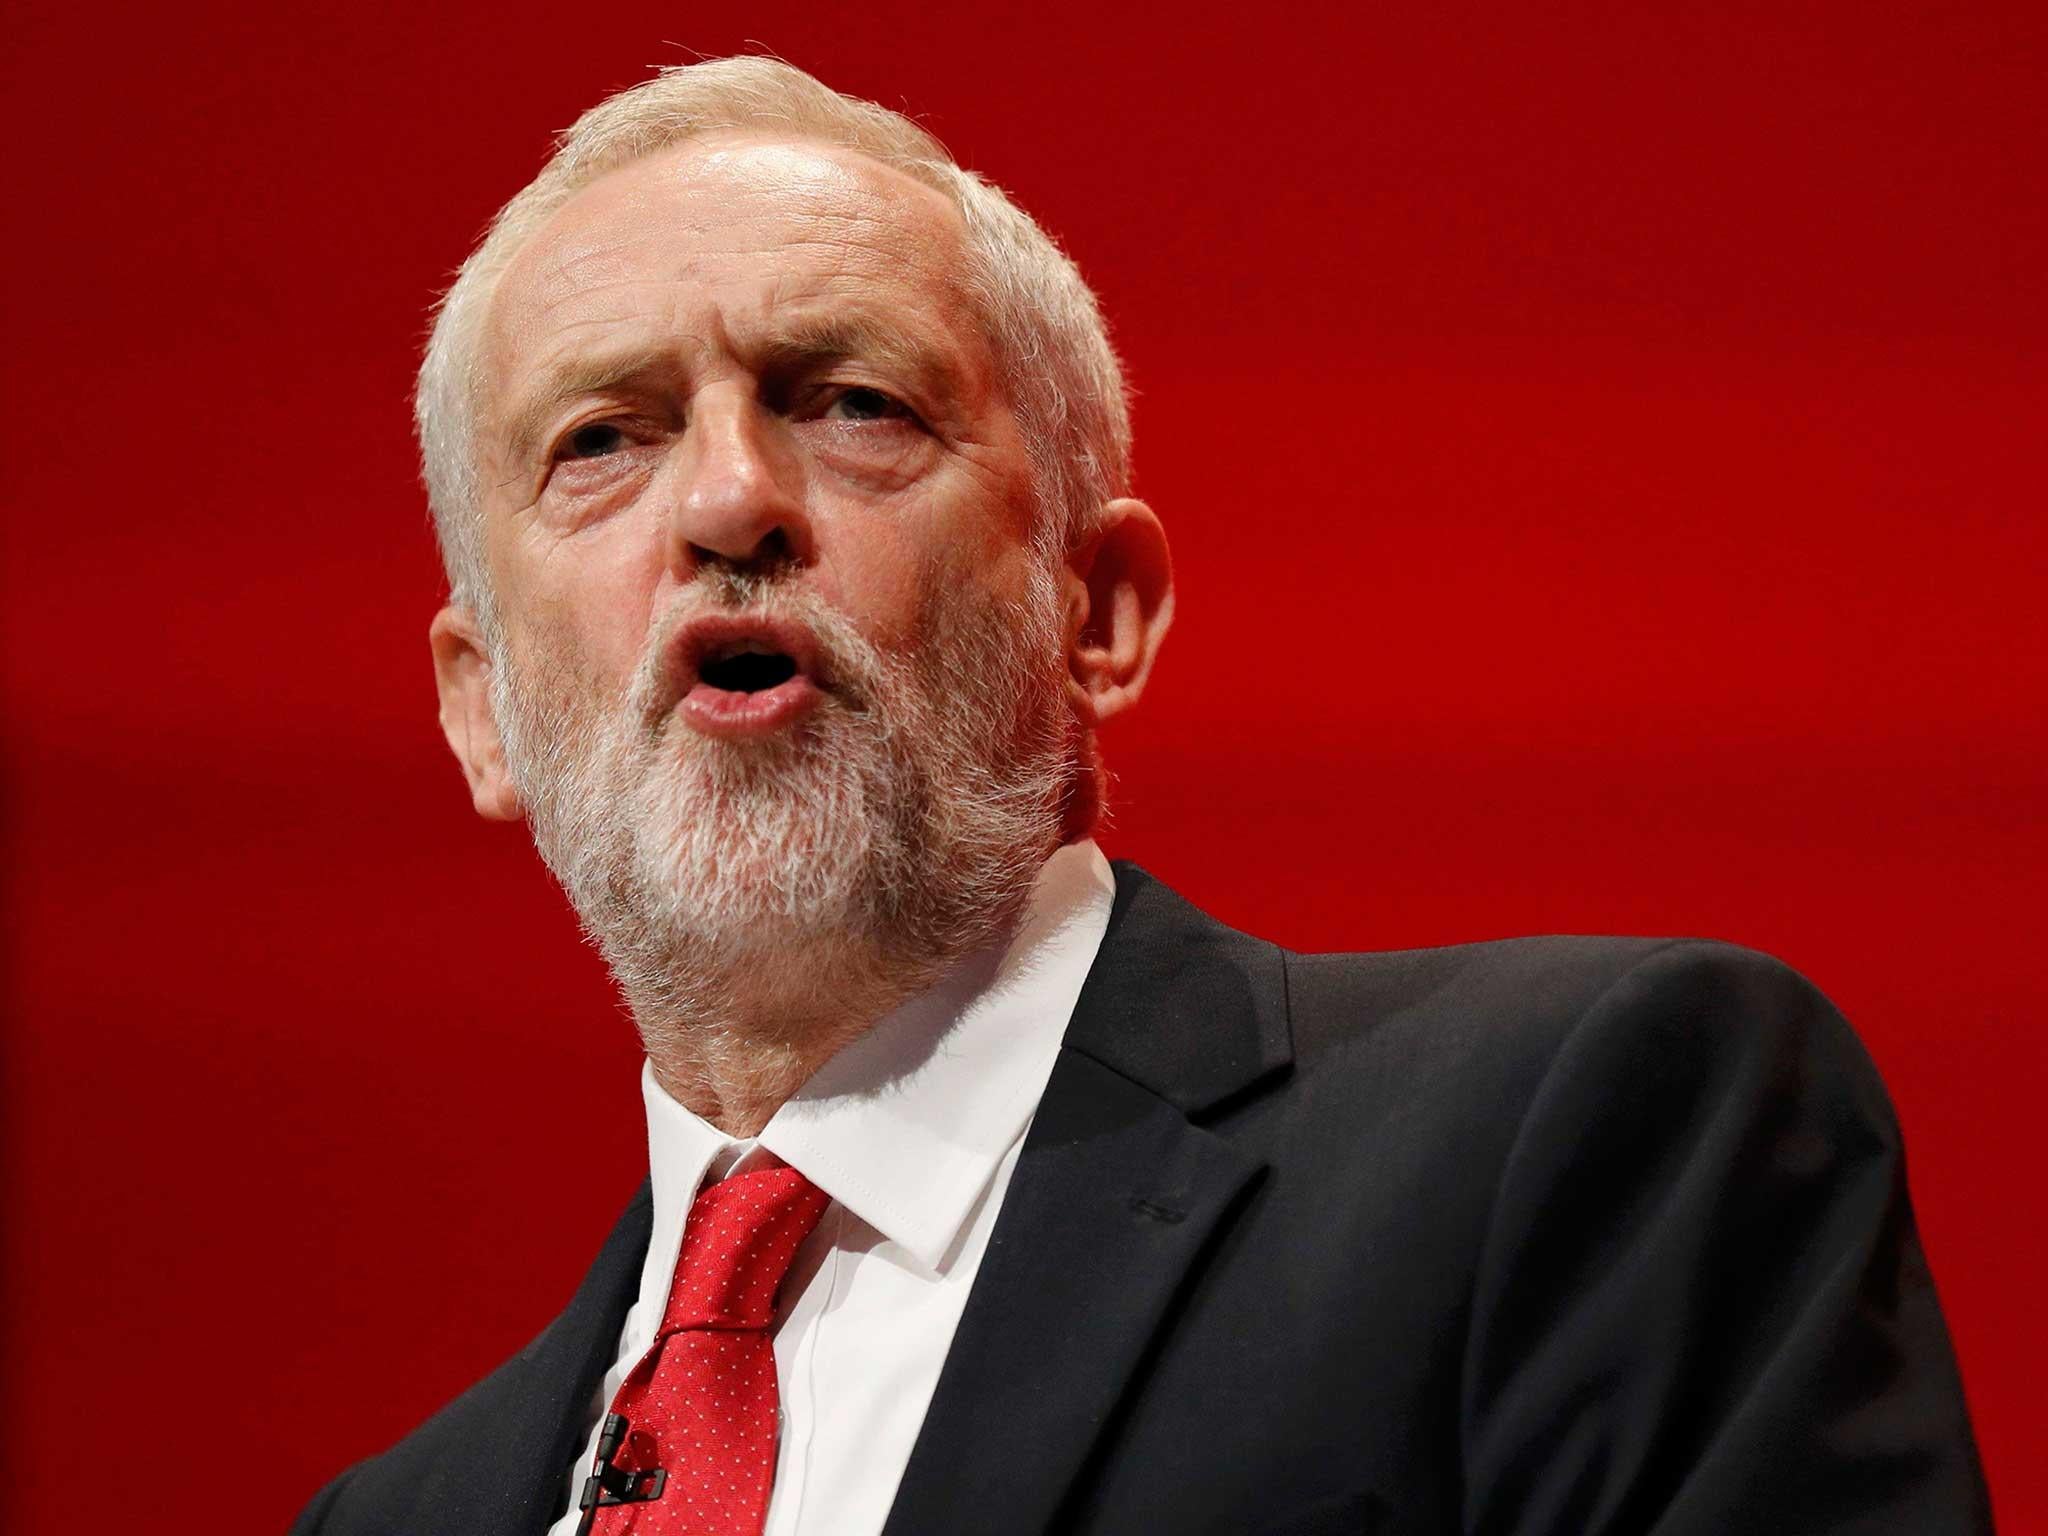 Jeremy Corbyn has defended free movement of people